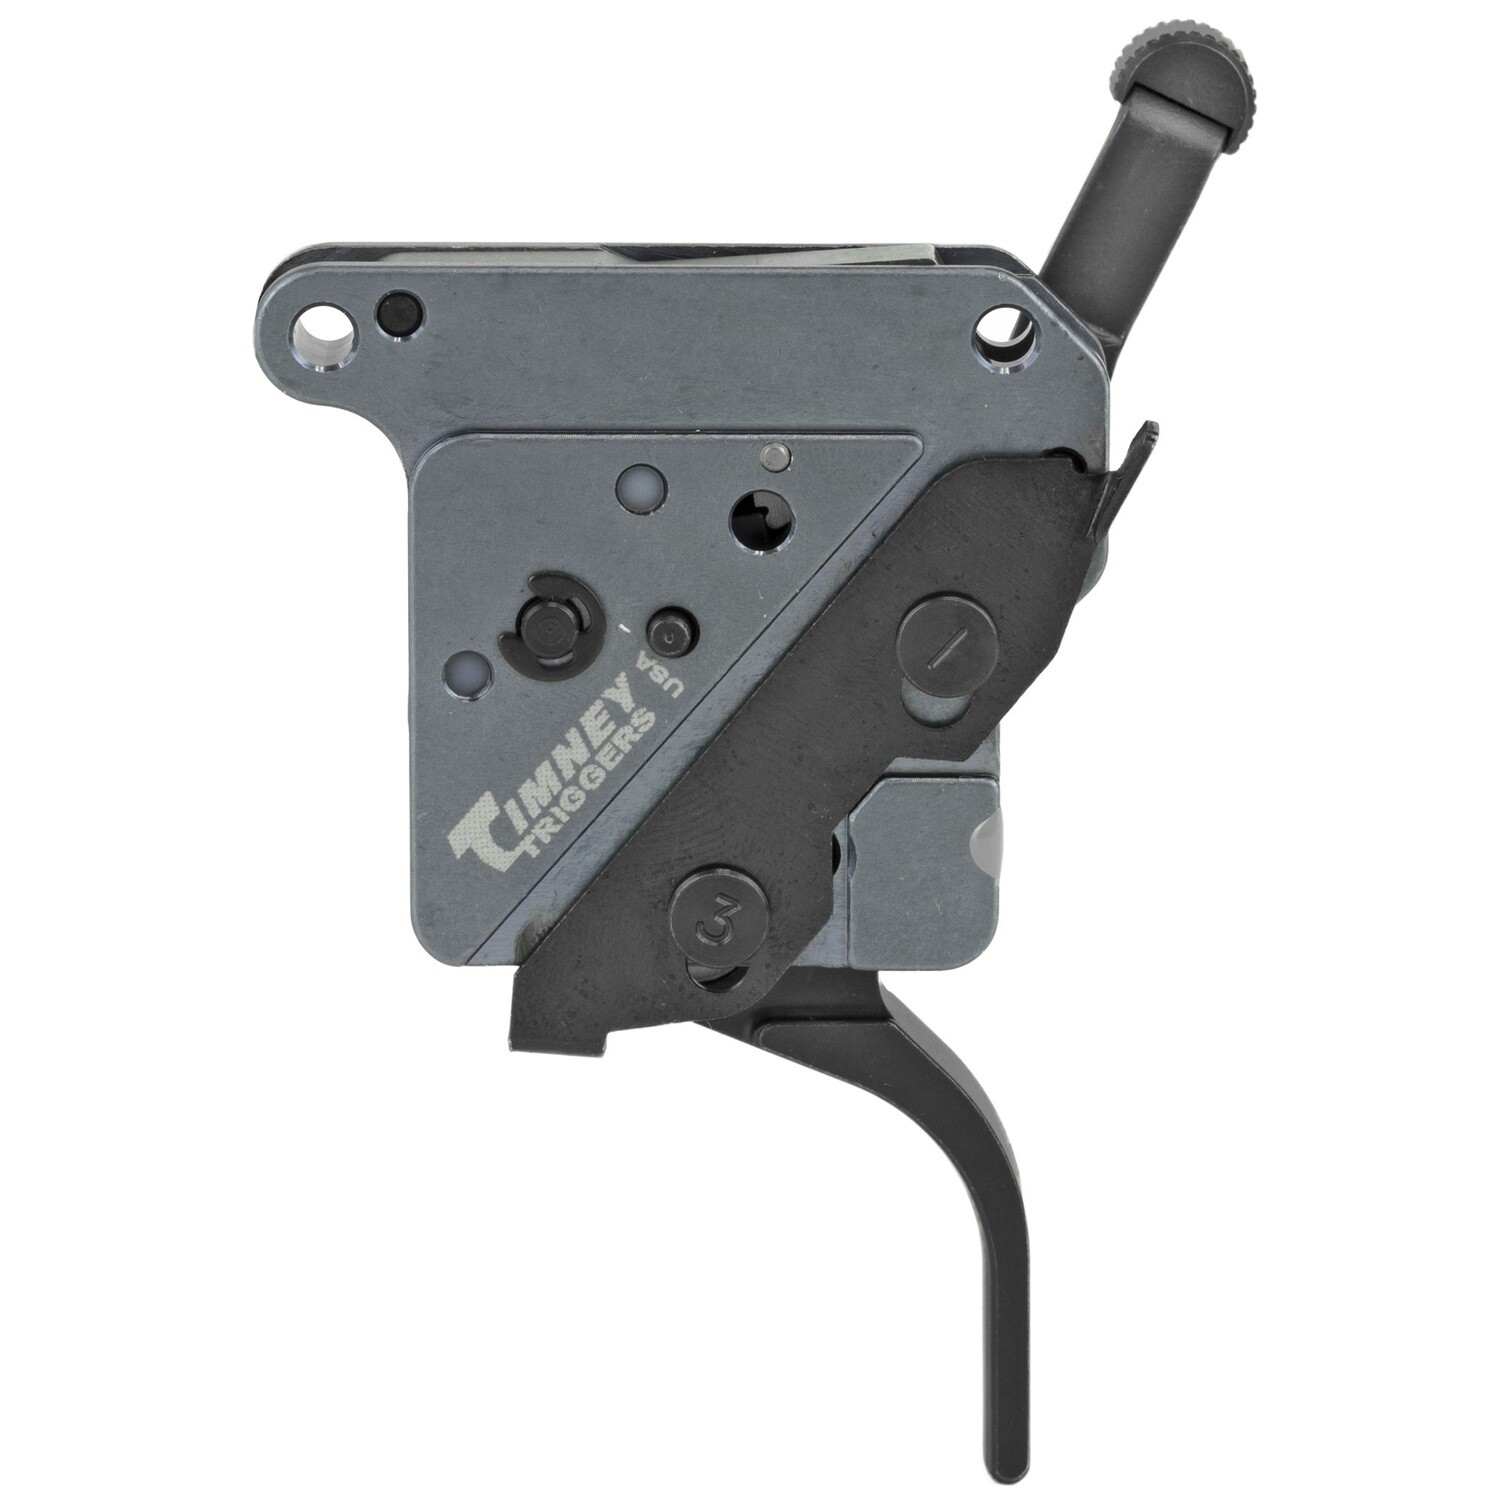 Timney Triggers, "The Hit" Straight Trigger For Remington 700